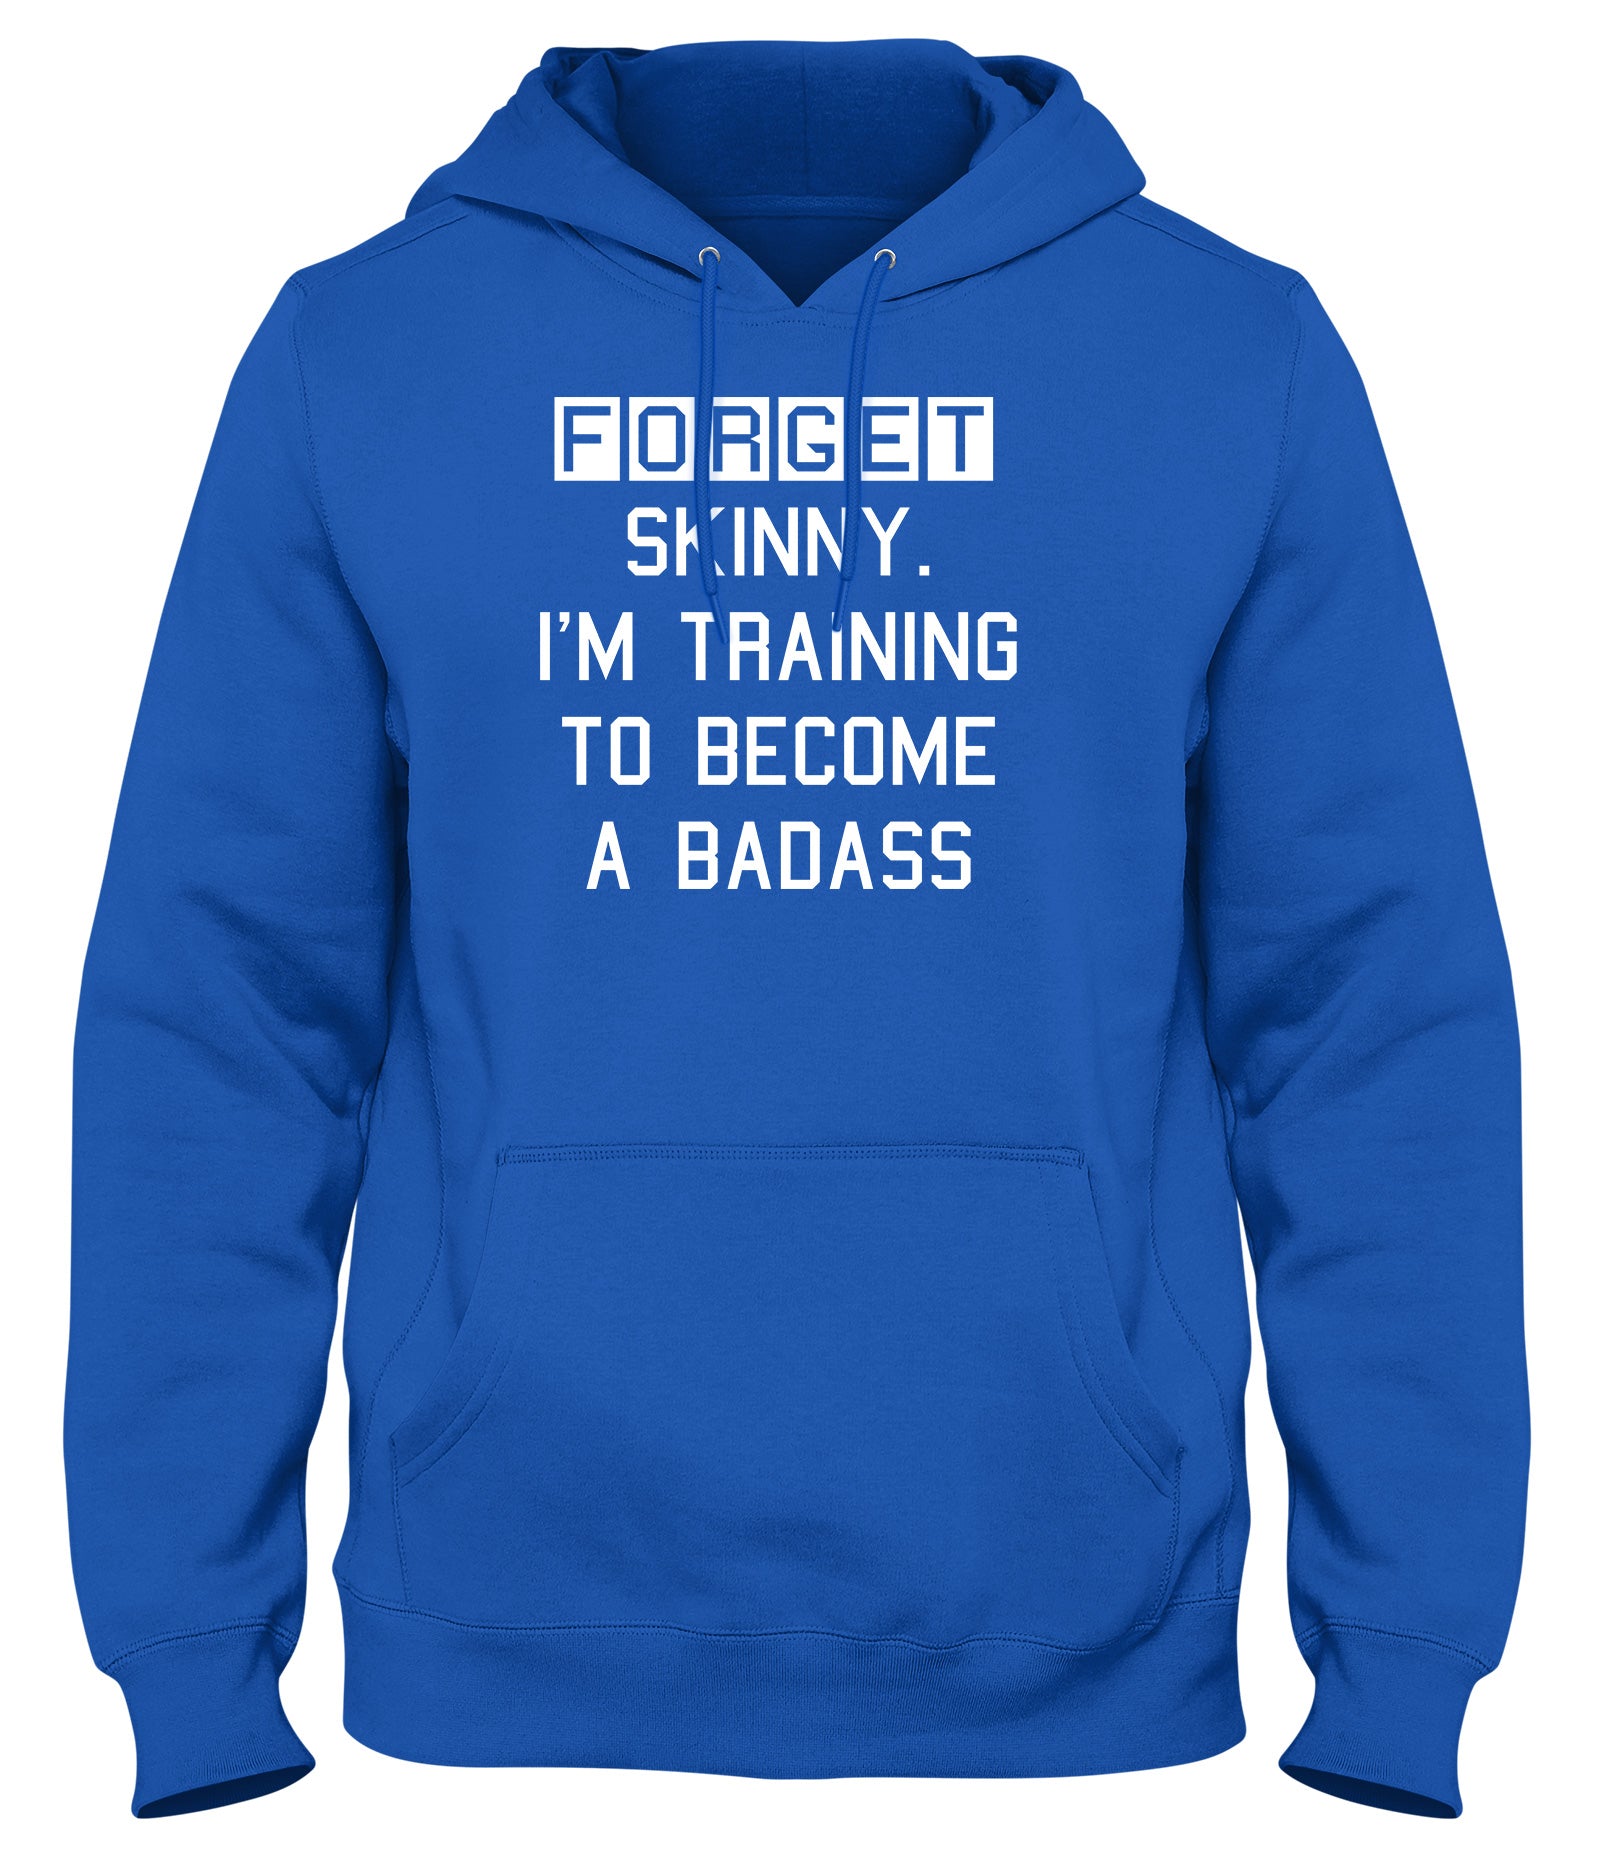 FORGET SKINNY. I'M TRAINING TO BECOME A BADASS MENS LADIES WOMENS UNISEX HOODIE